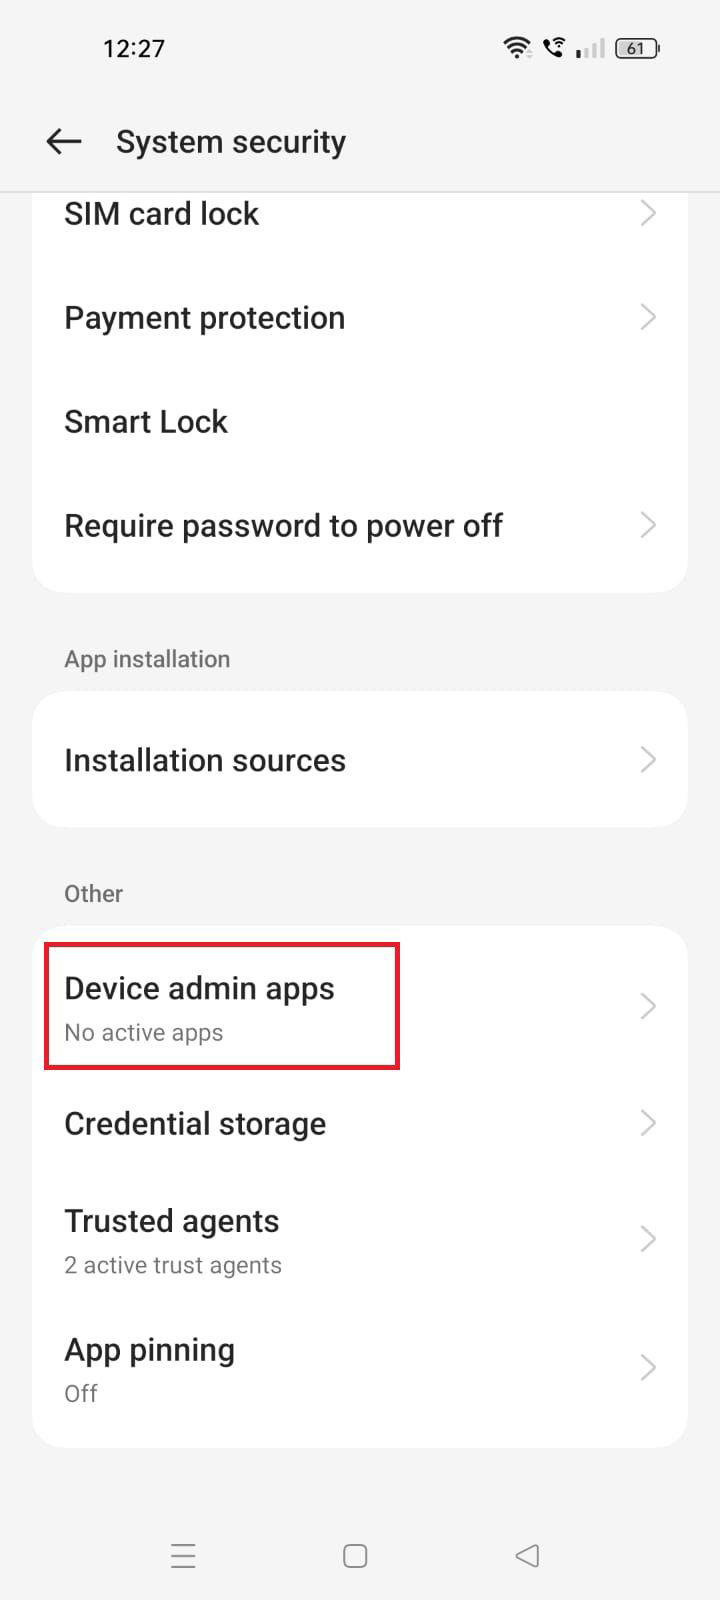 Screenshot highlighting Device admin apps under System security